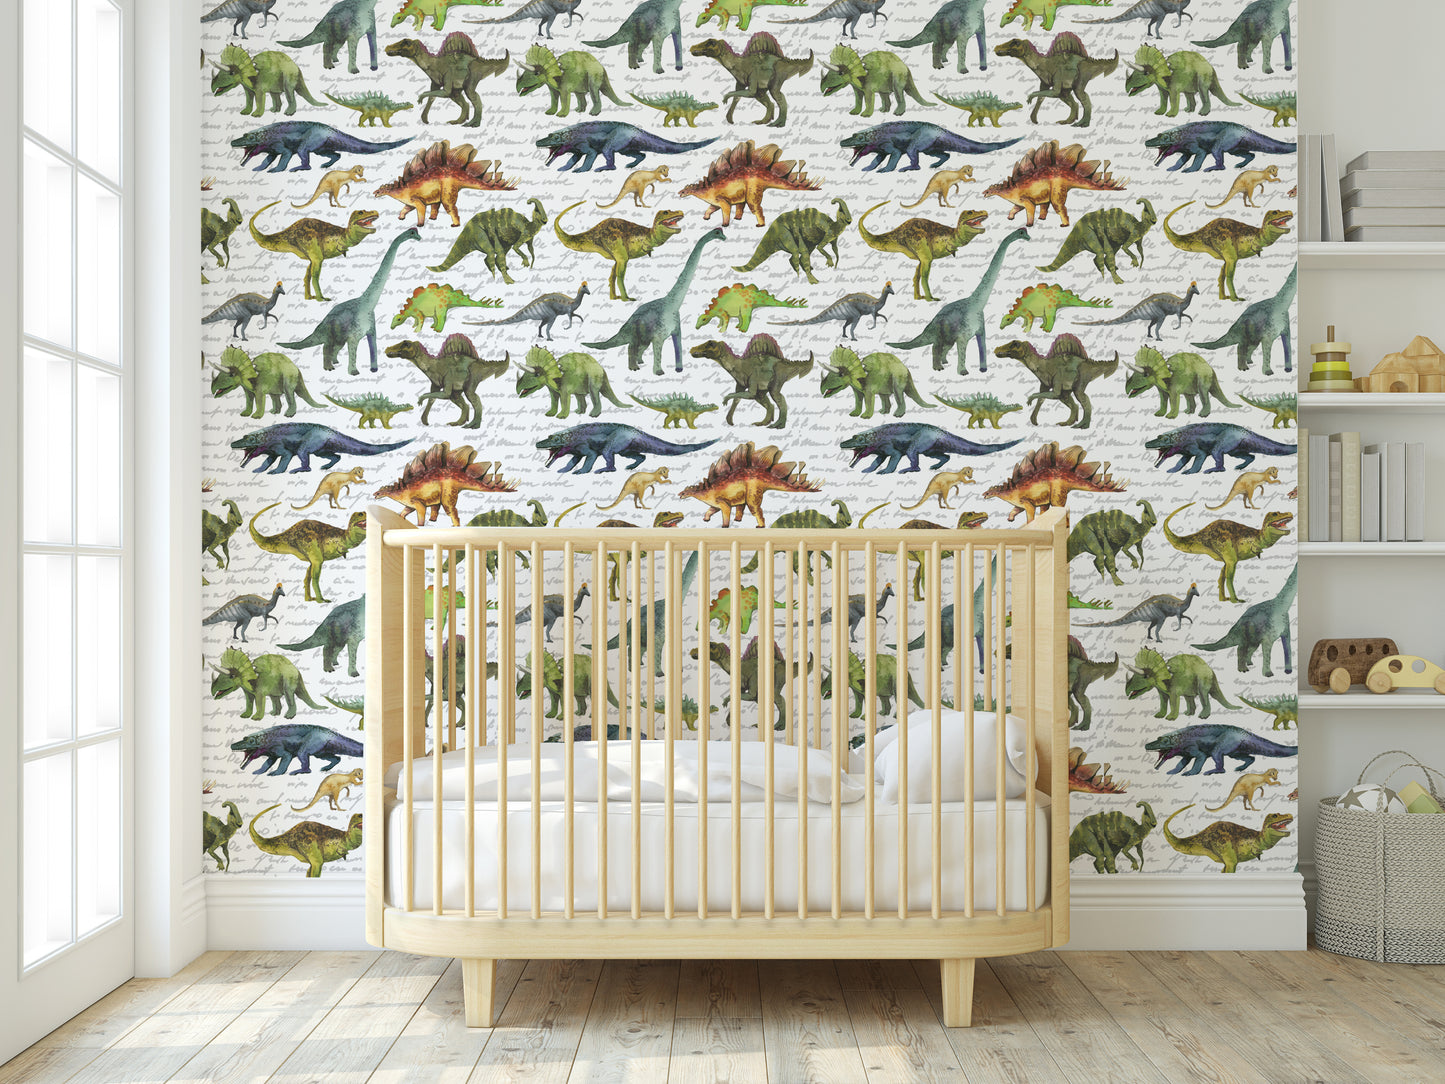 Dinosaur removable peel and stick wallpaper in nursery